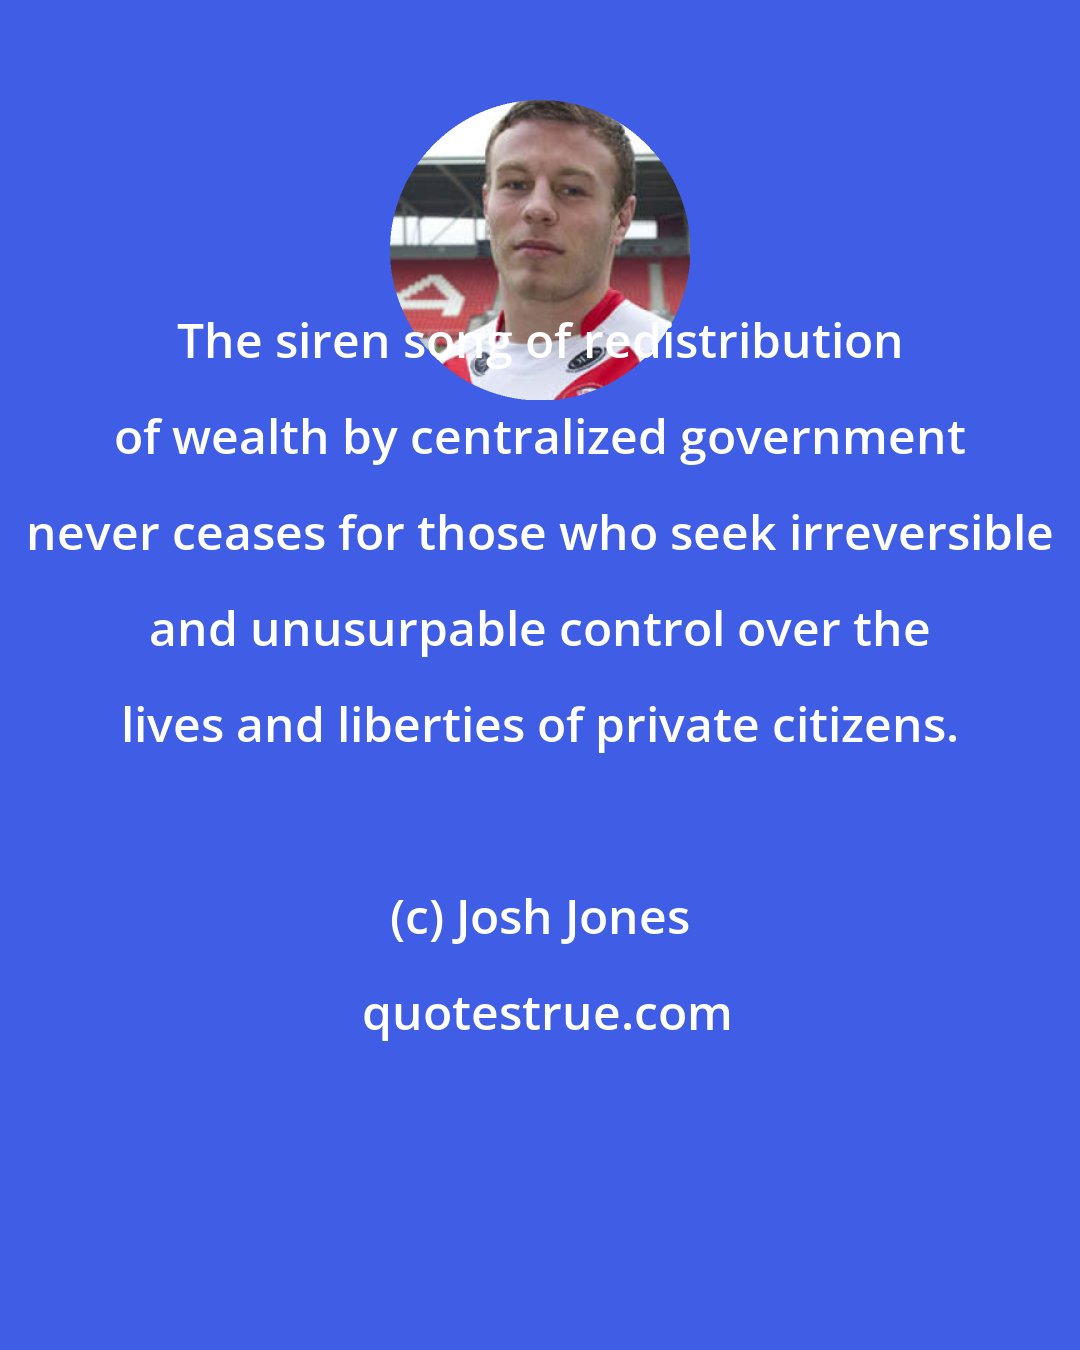 Josh Jones: The siren song of redistribution of wealth by centralized government never ceases for those who seek irreversible and unusurpable control over the lives and liberties of private citizens.